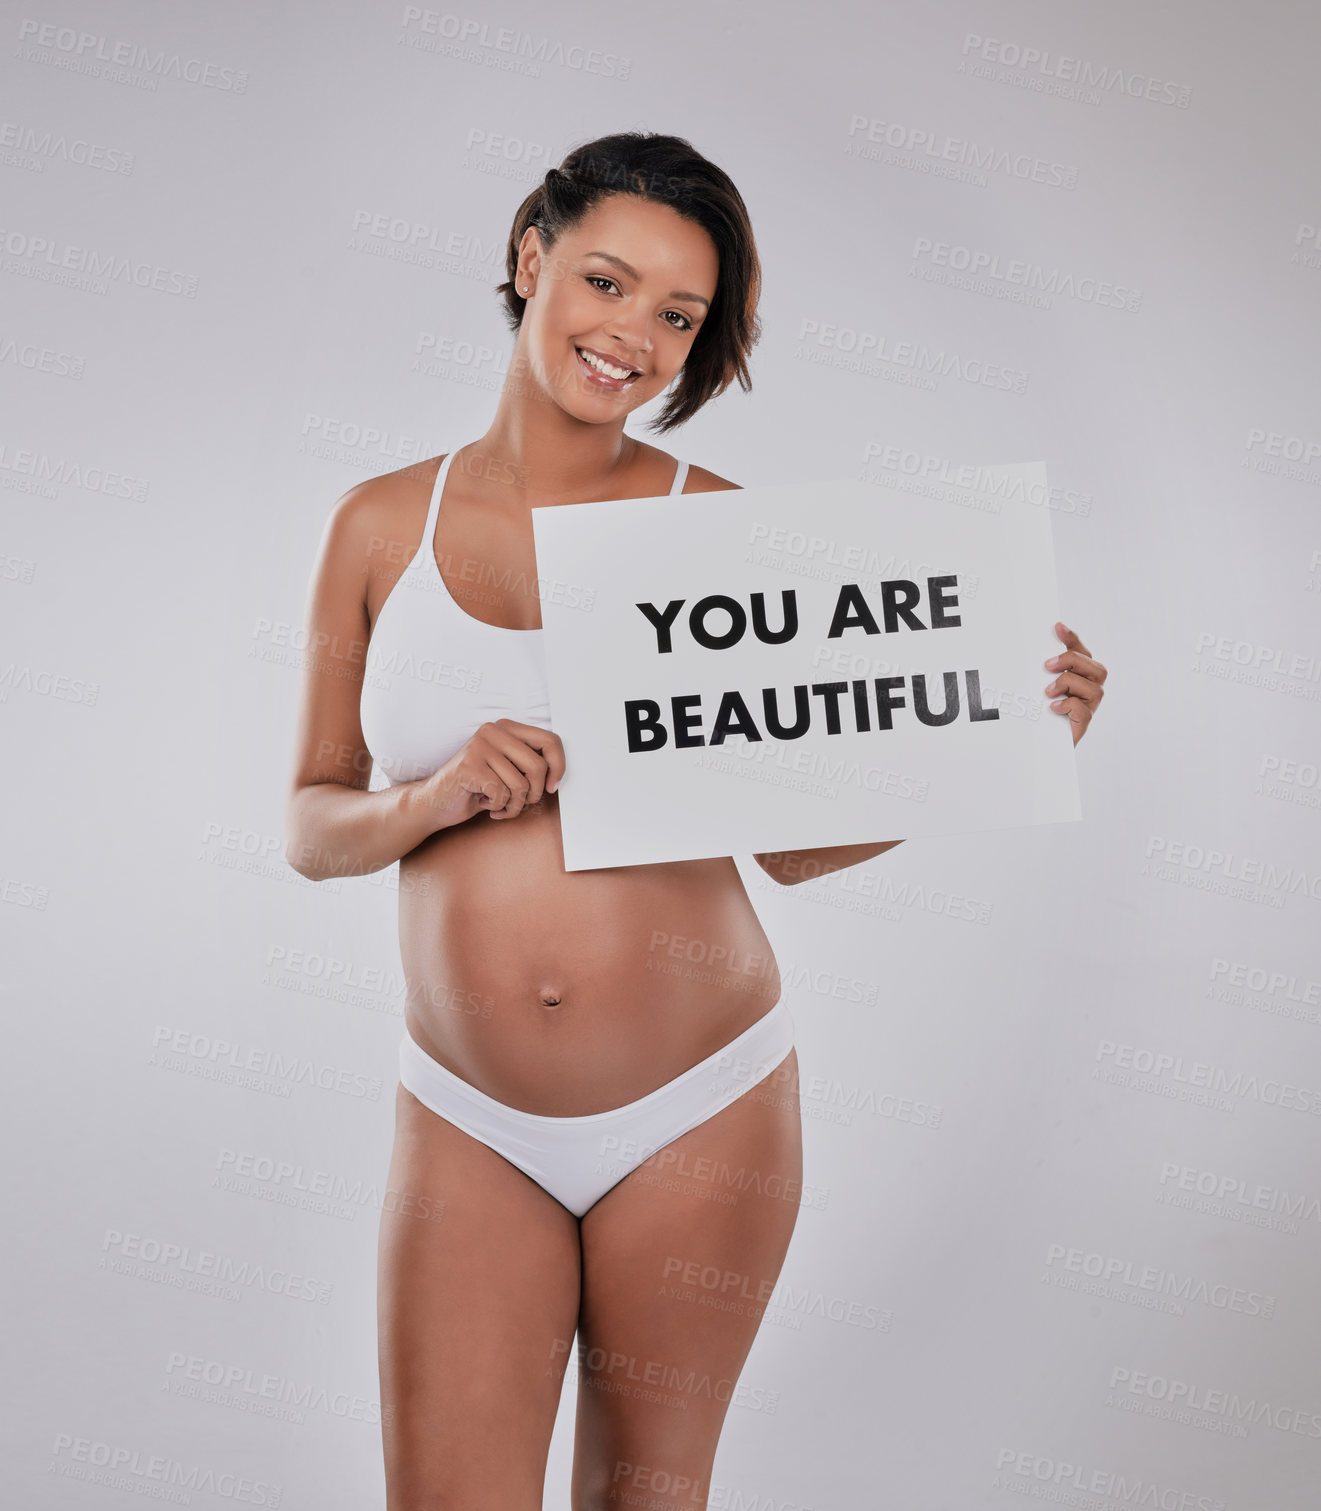 Buy stock photo Studio portrait of a beautiful young pregnant woman holding a sign with the word, “You are beautiful” on it